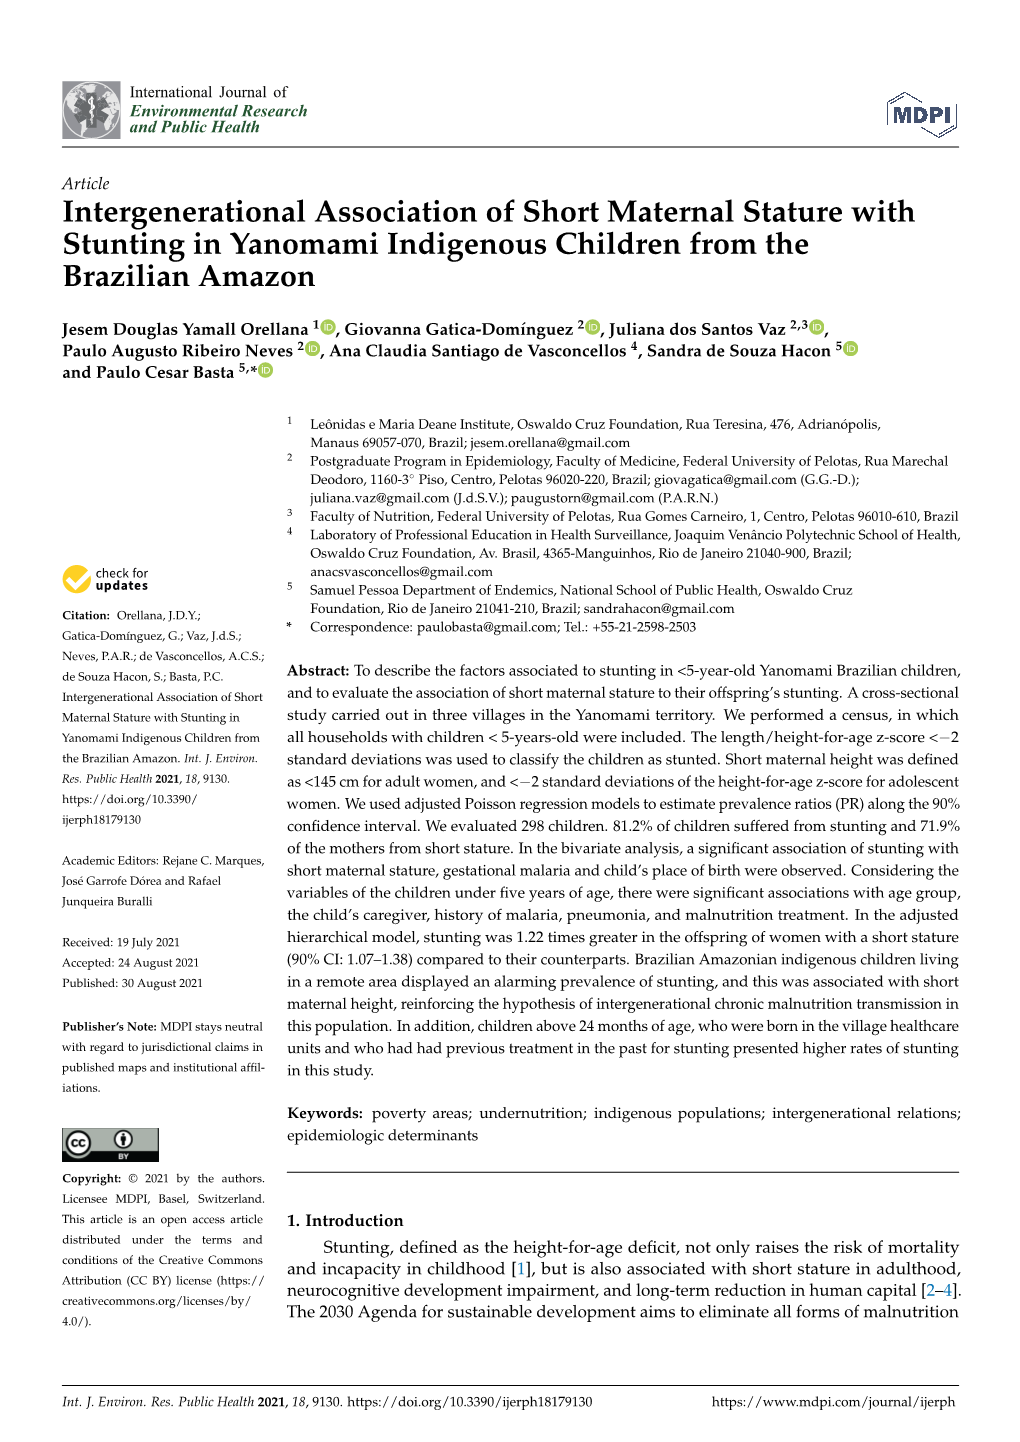 Intergenerational Association of Short Maternal Stature with Stunting in Yanomami Indigenous Children from the Brazilian Amazon